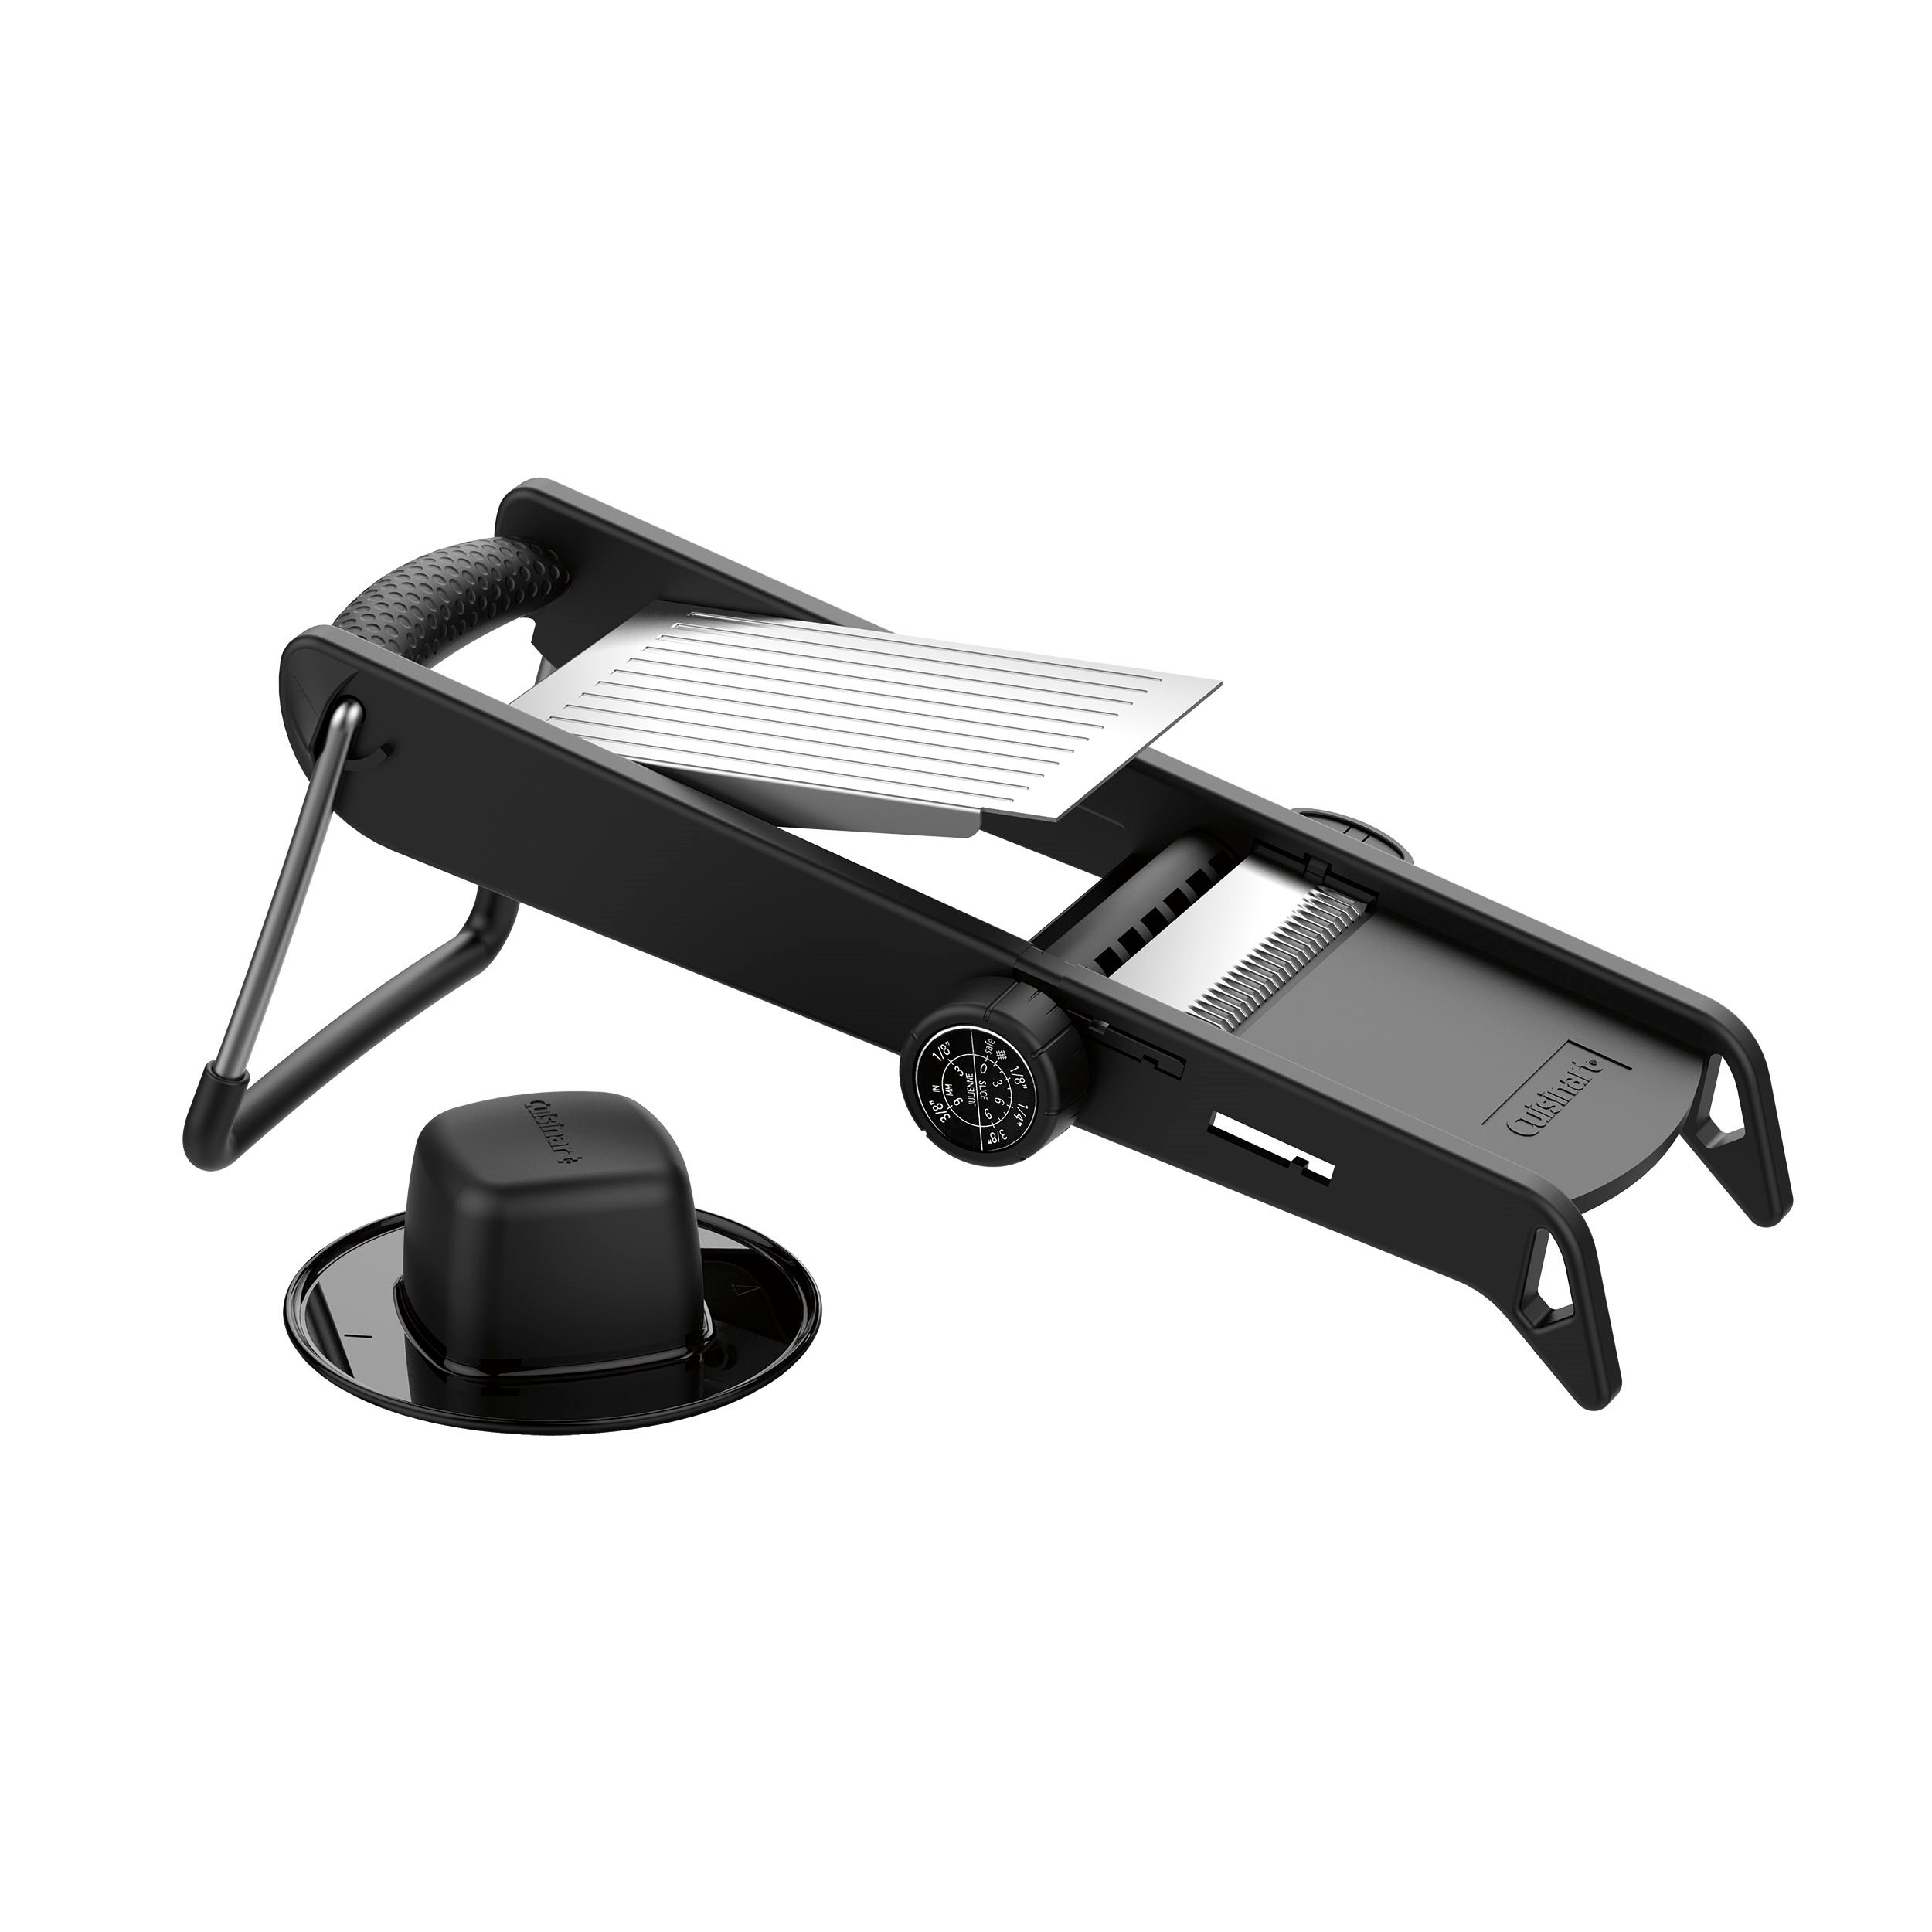 Review of the Cuisinart Mandoline Slicer, Is it Sturdy and Work Well 